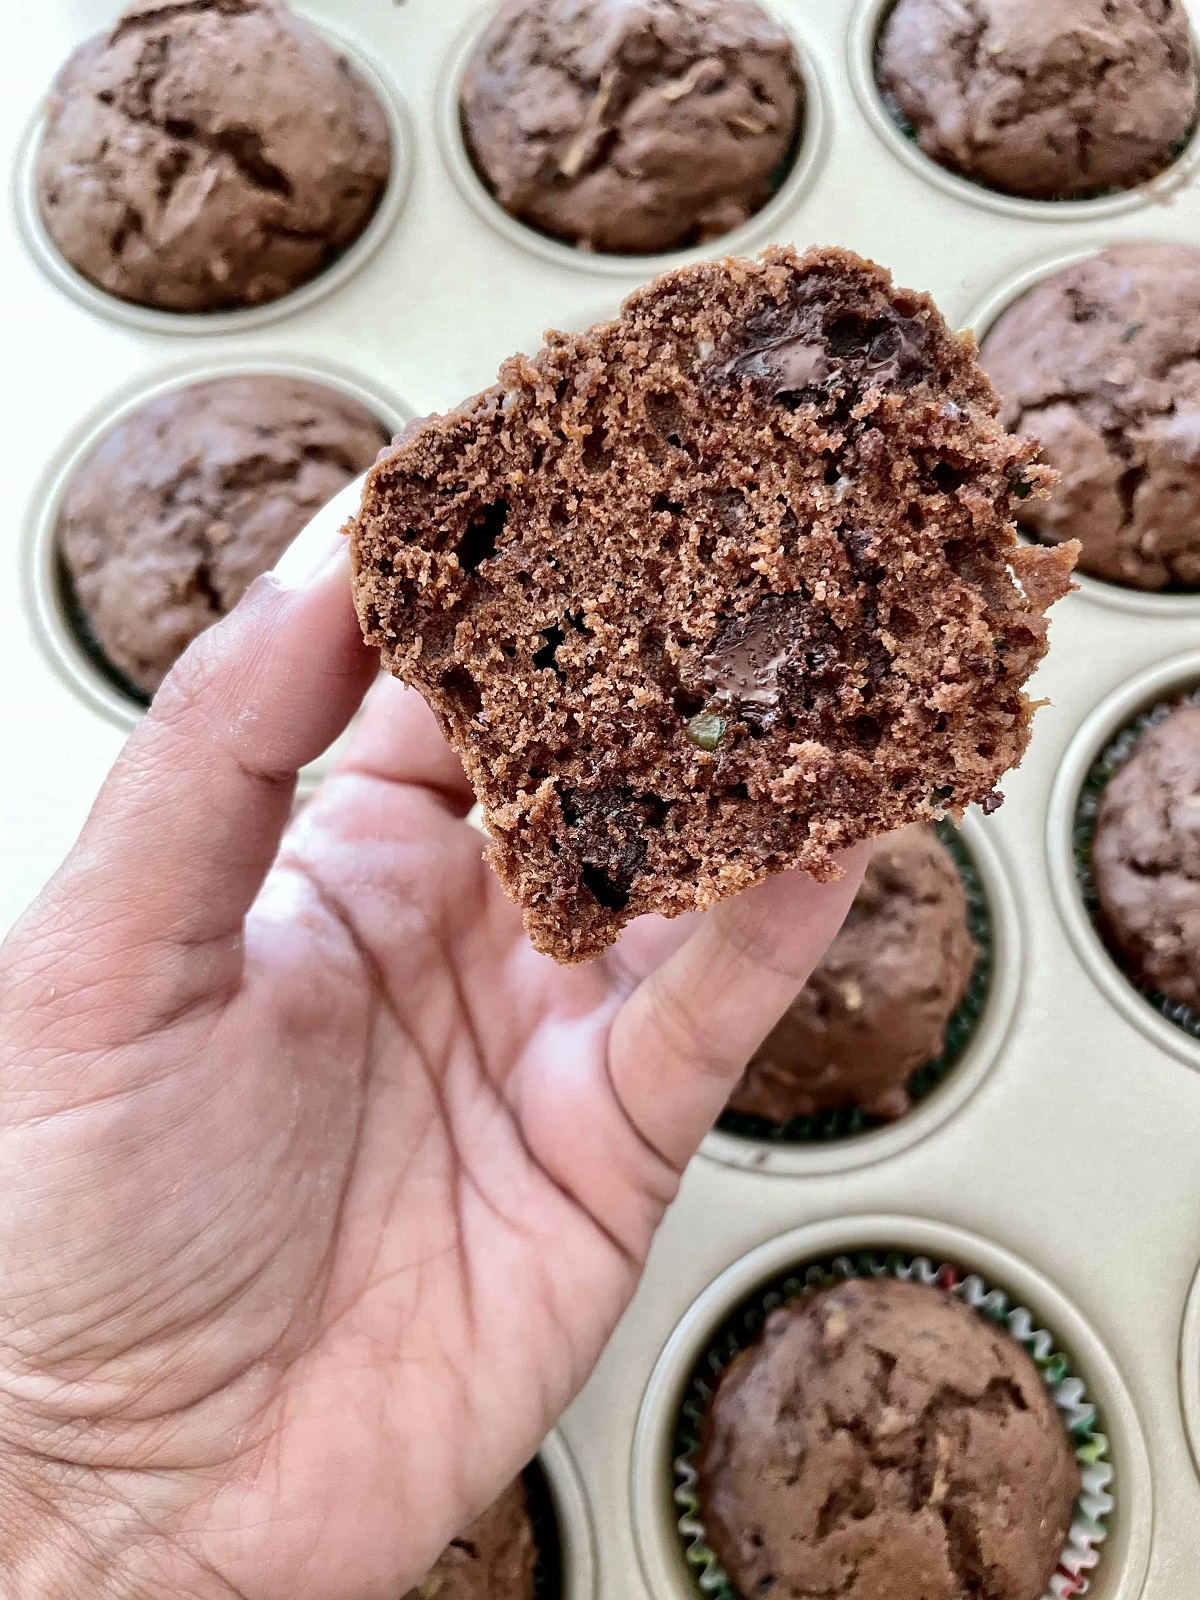 A hand holding a chocolate chip zucchini muffin that has been sliced in half.